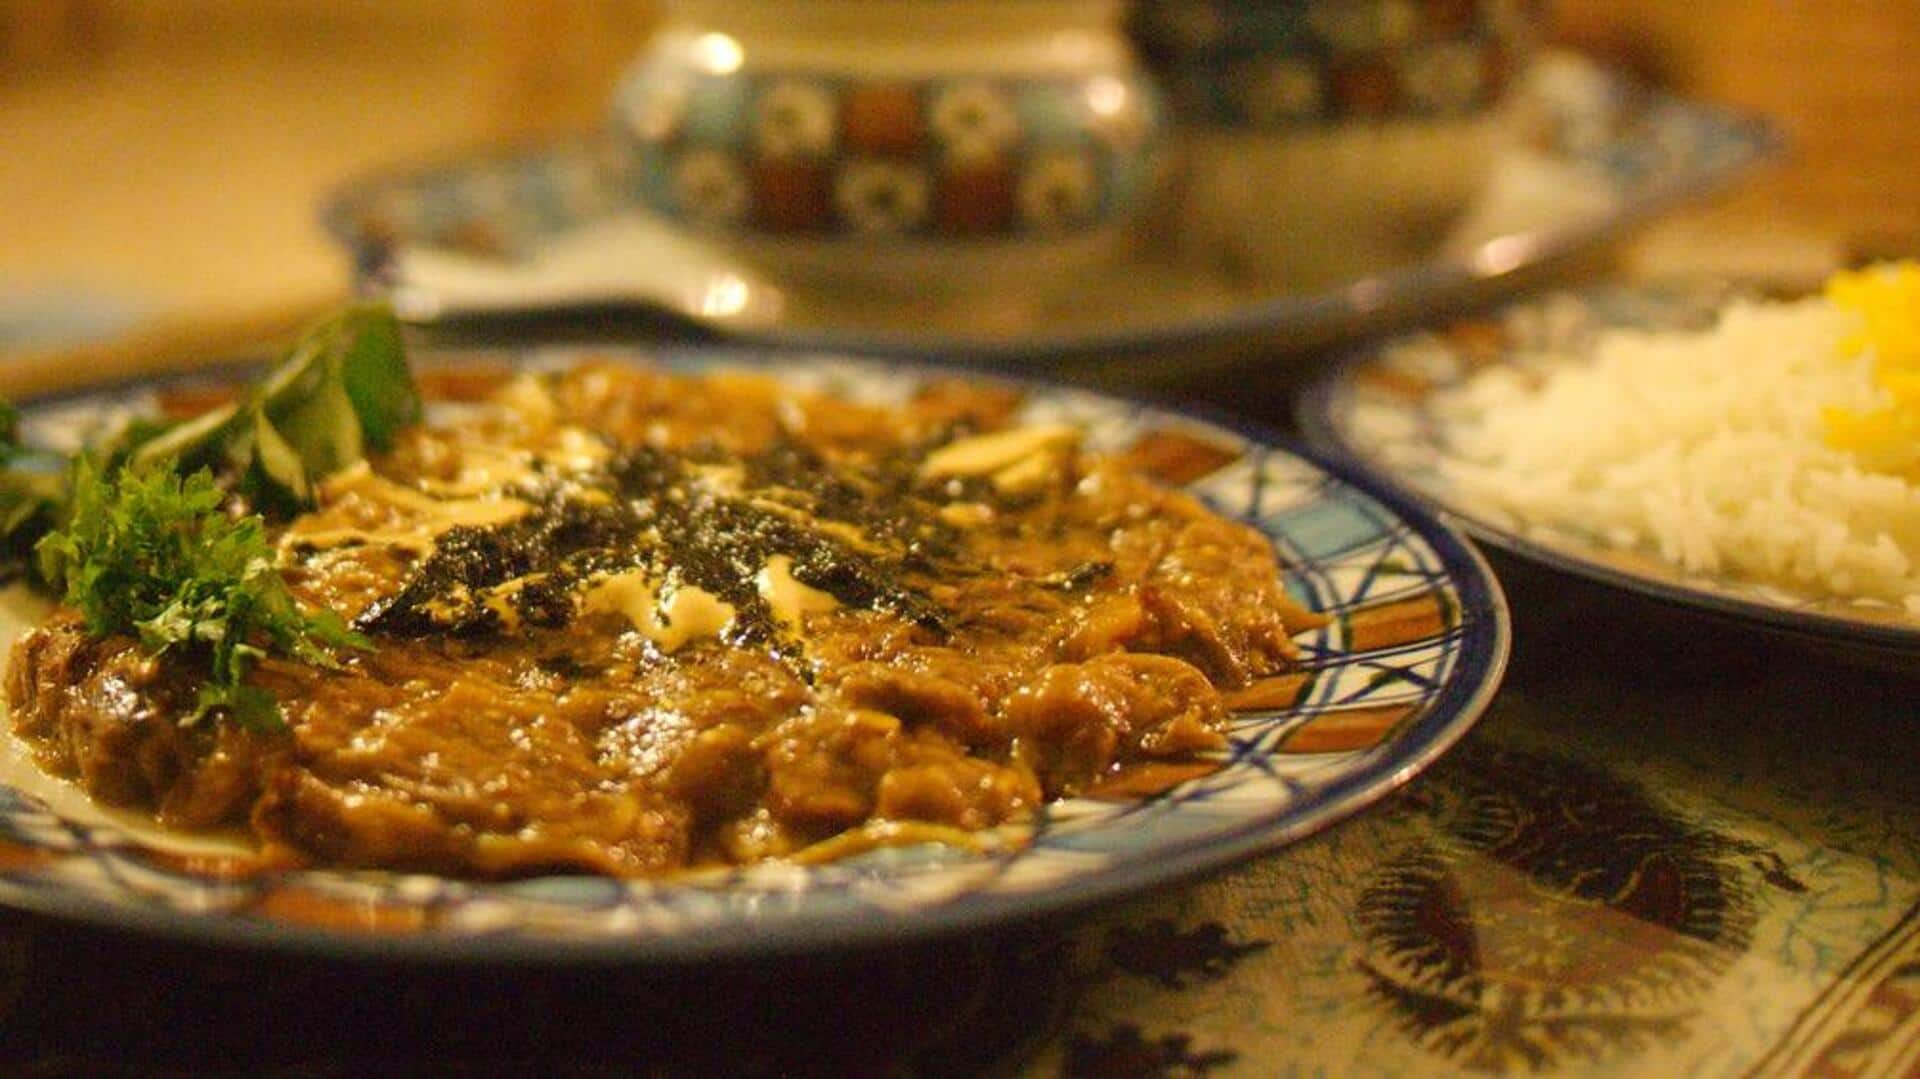 Impress your guests with this Persian pomegranate walnut stew